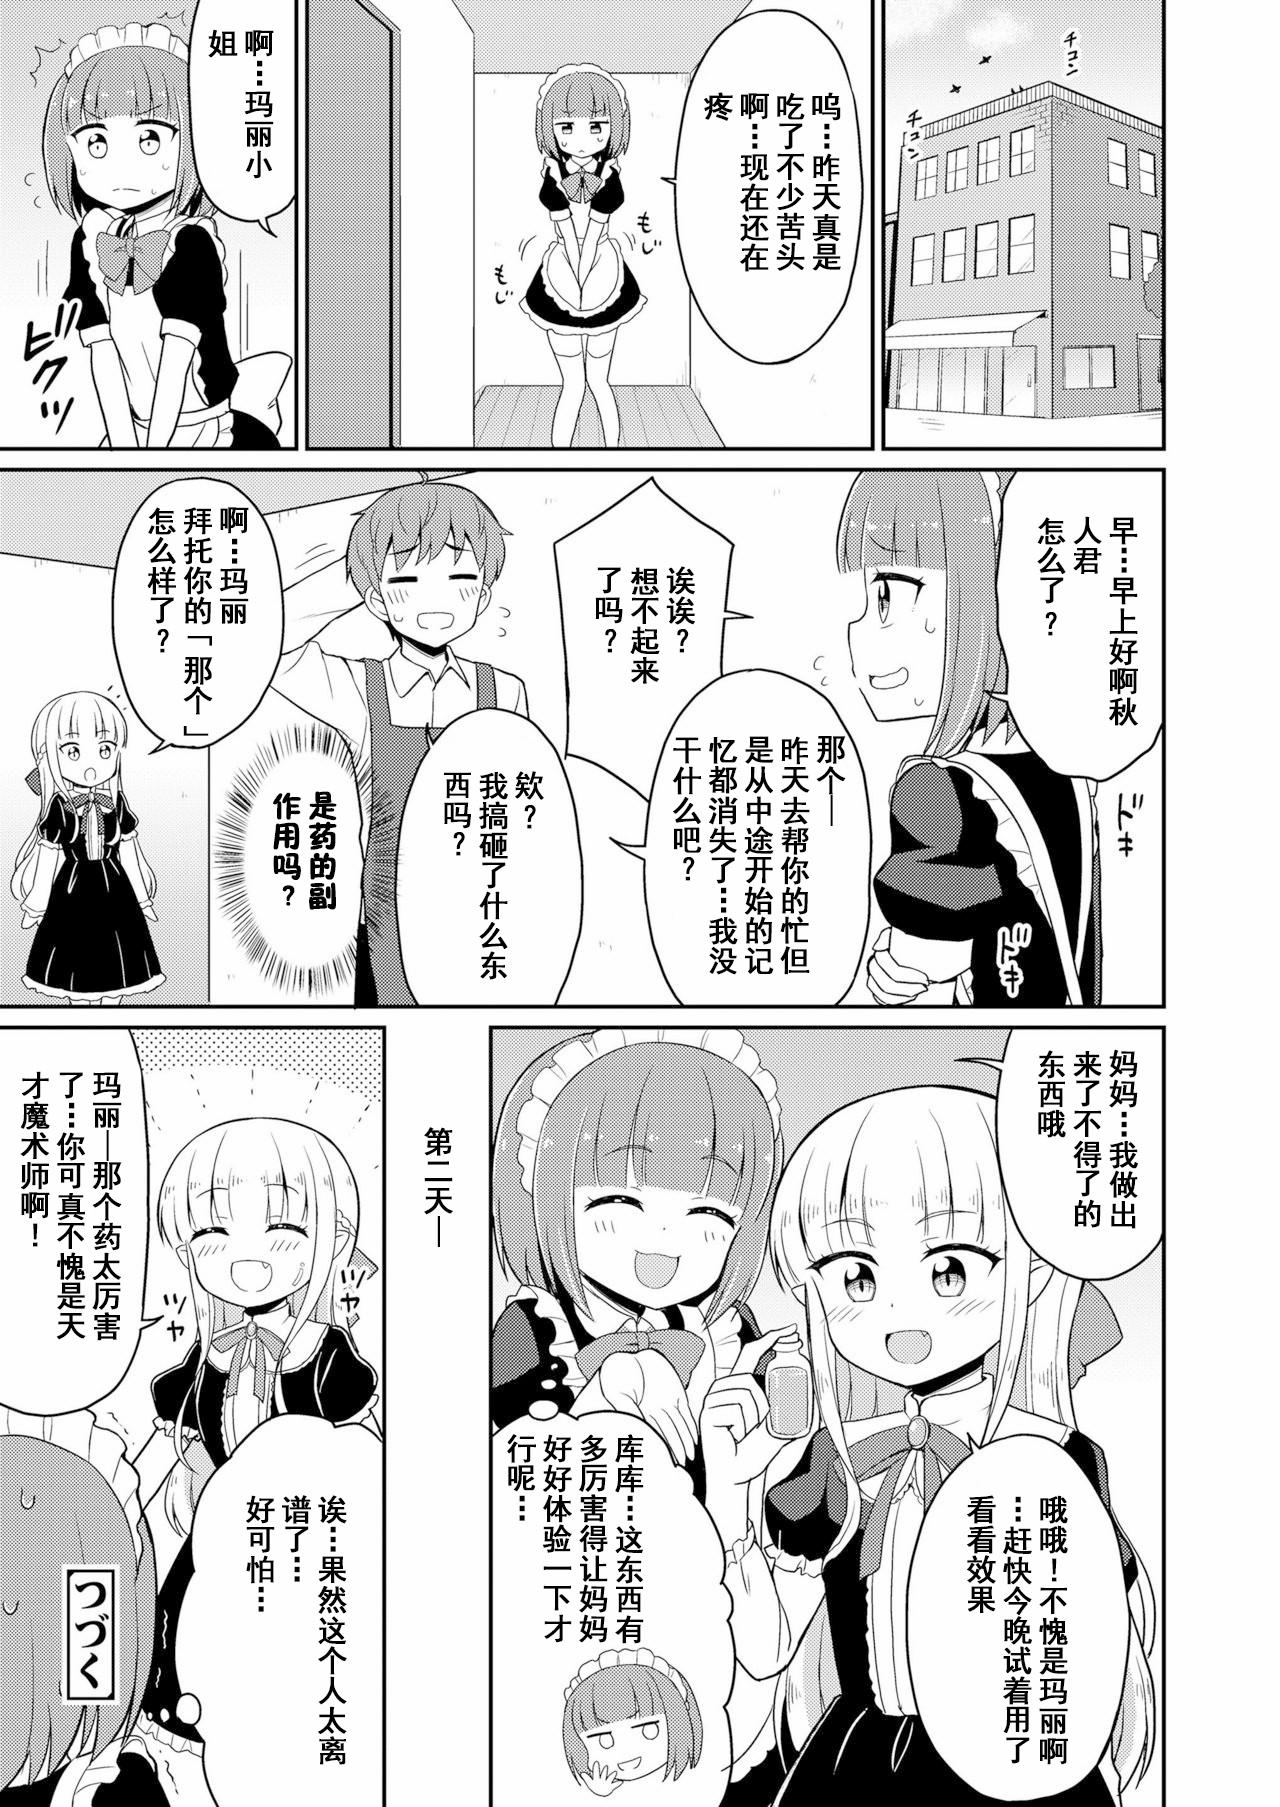 Free Fuck Cafe Eternal e Youkoso! Ch. 5 | 欢迎来到永远咖啡厅！第五话 Transexual - Page 25